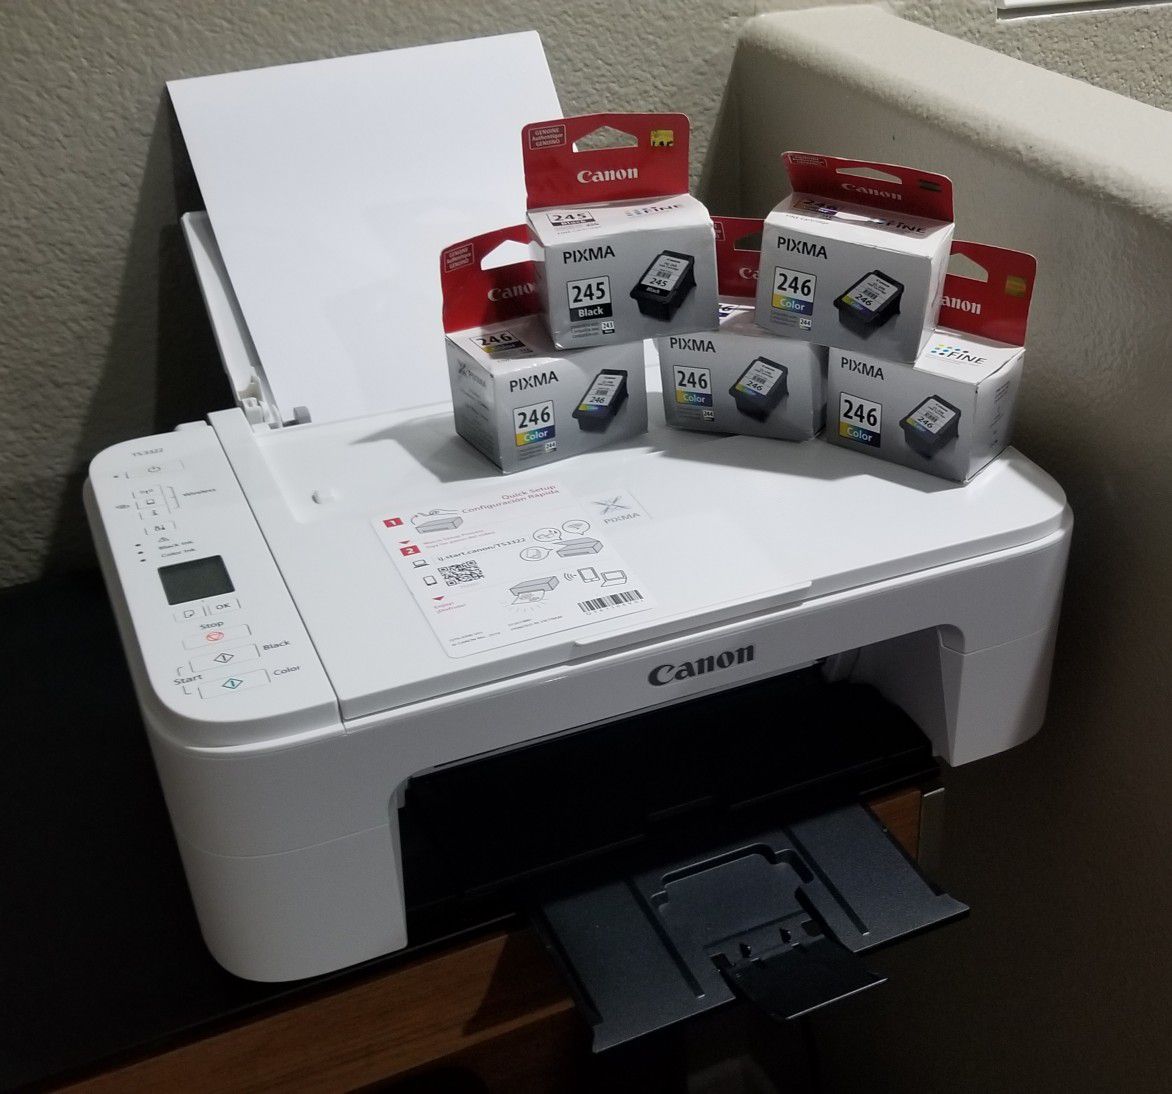 Printer with extras